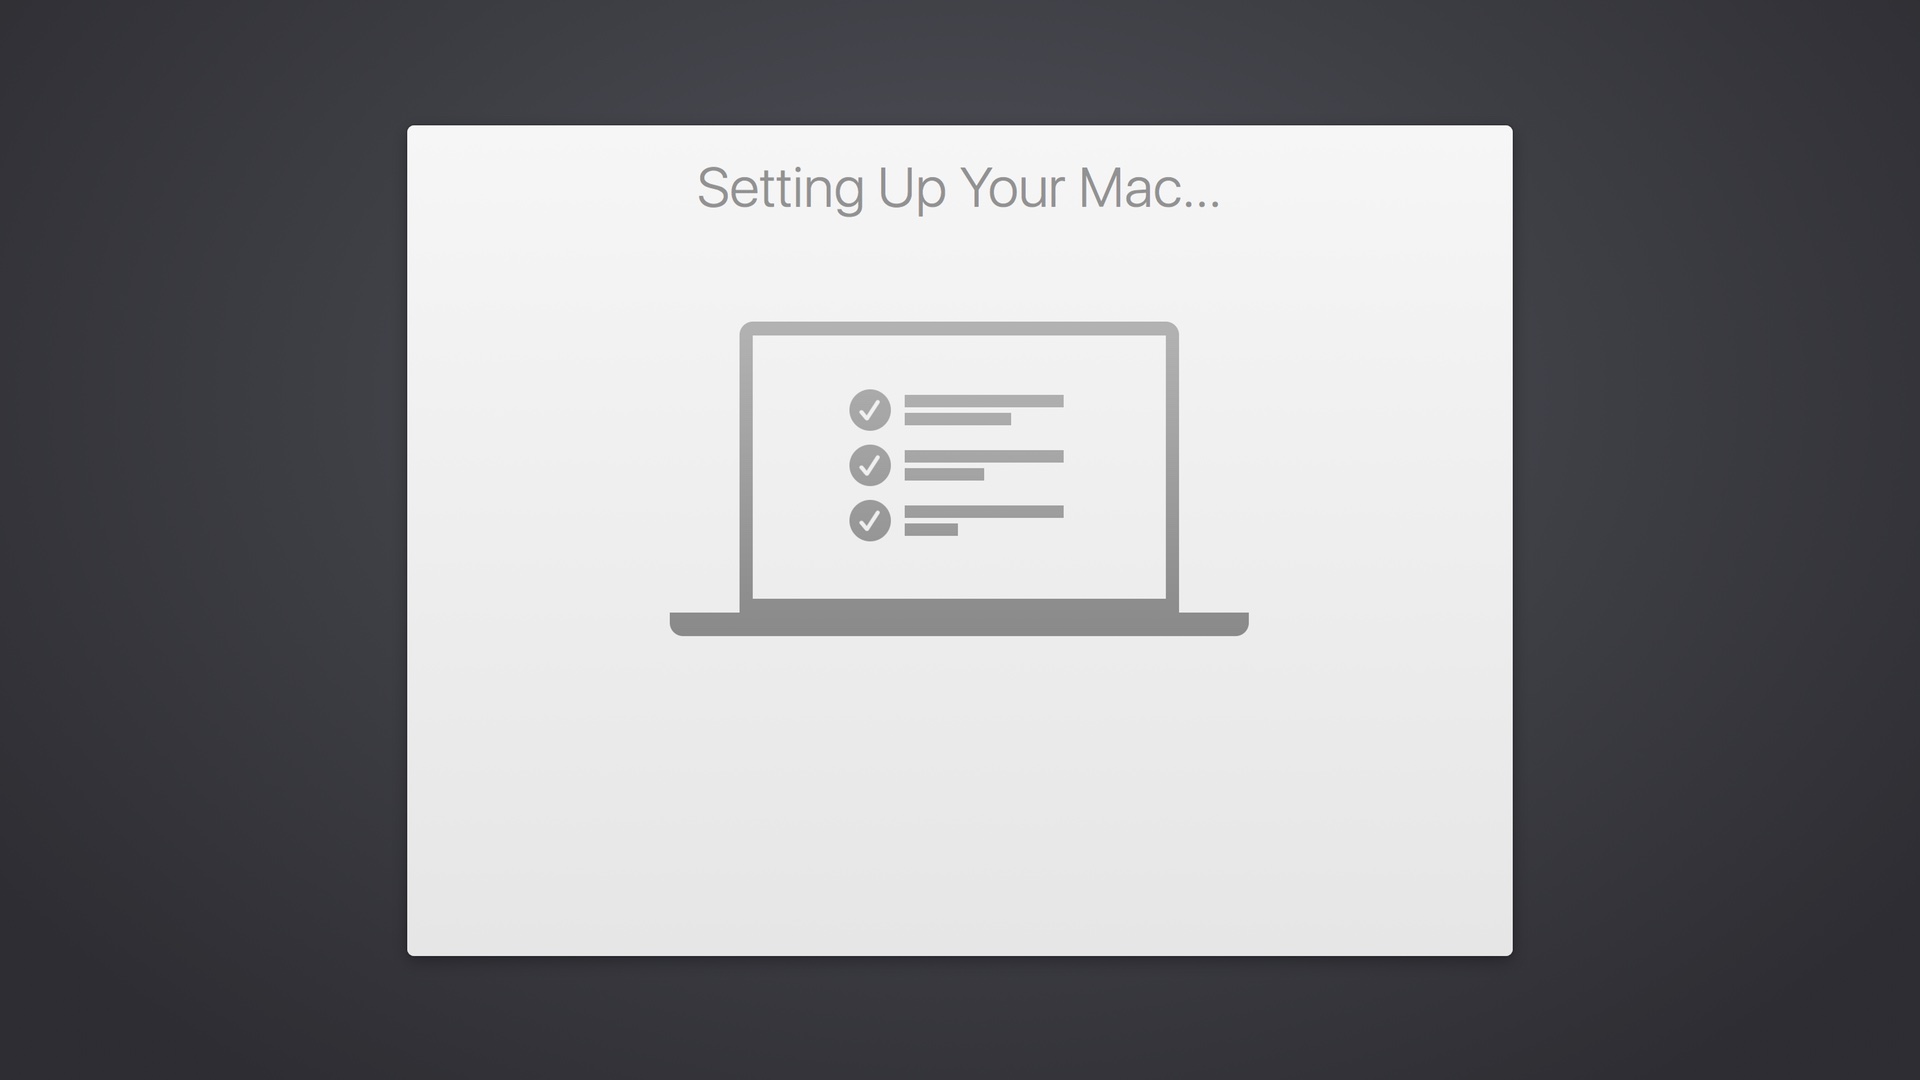 Setting Up Your Mac Tips for the First Time